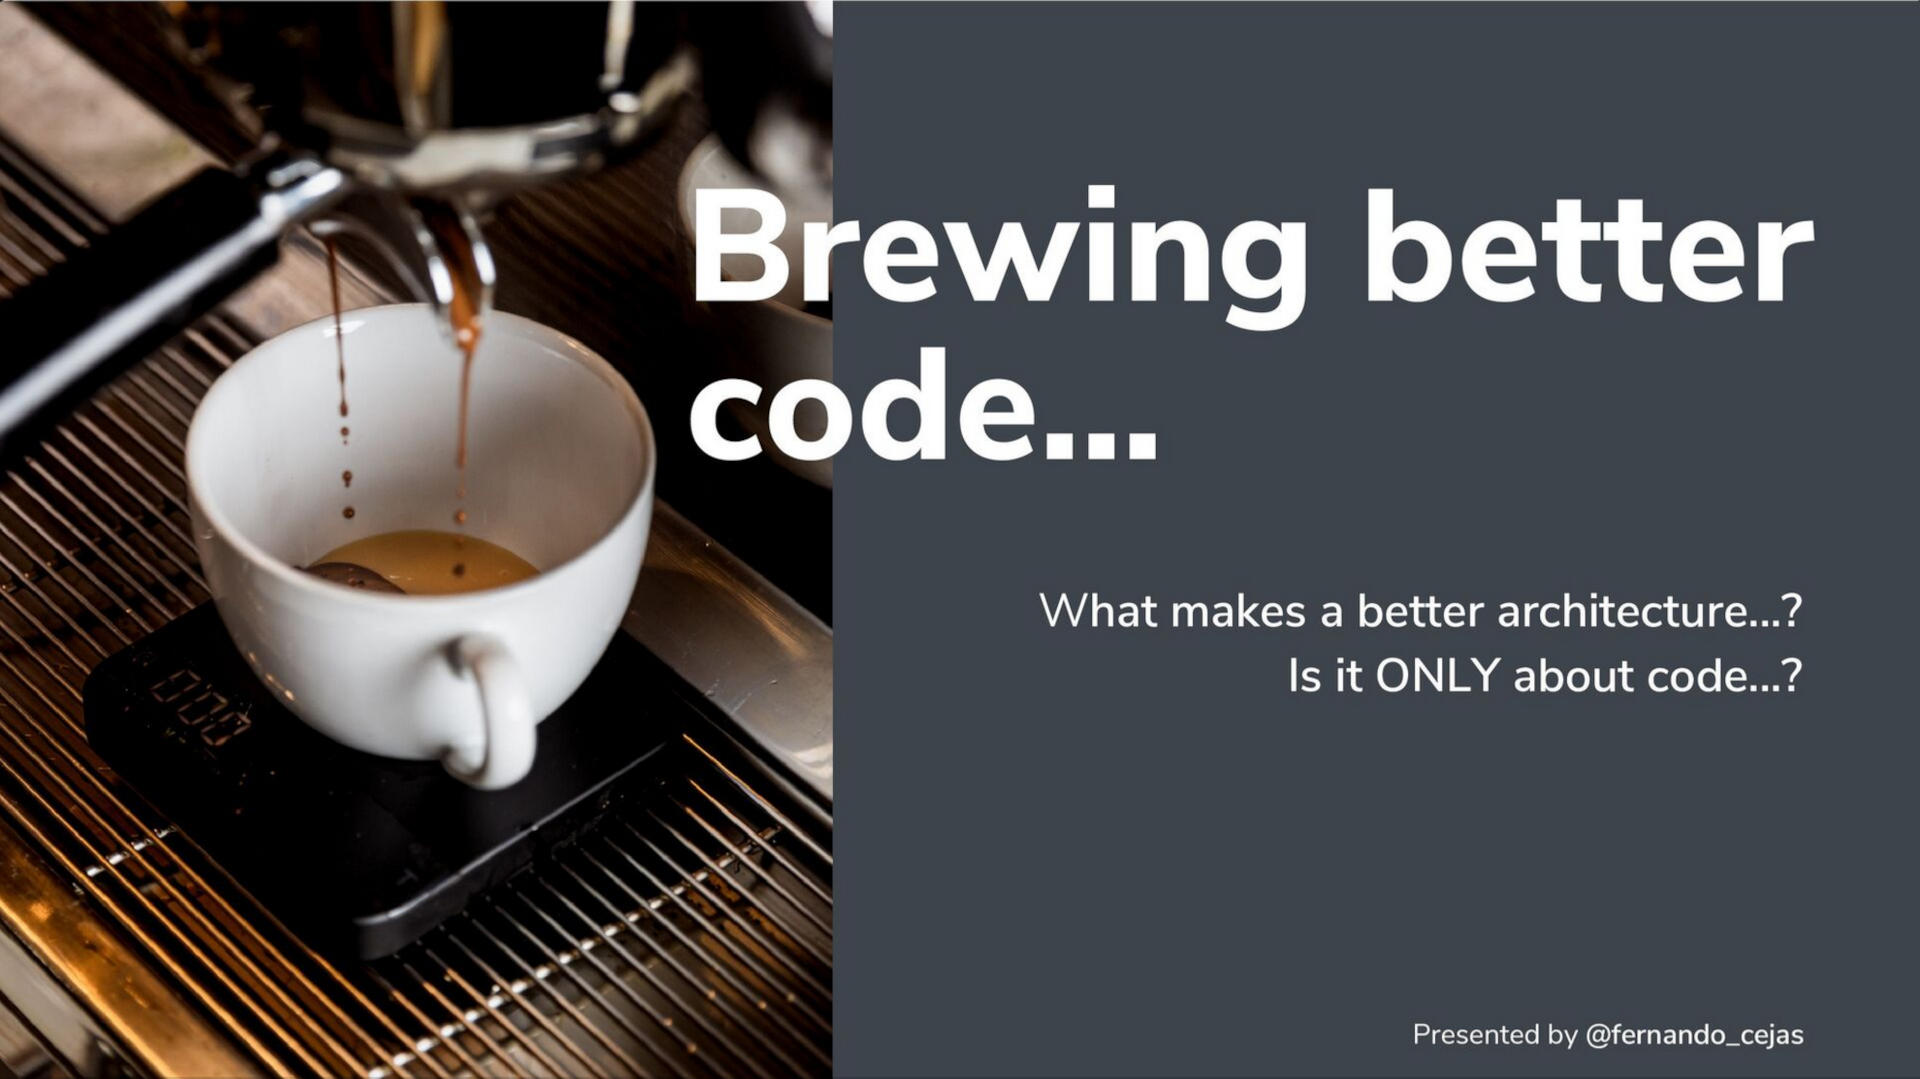 Brewing better code... What makes a good architecture? 